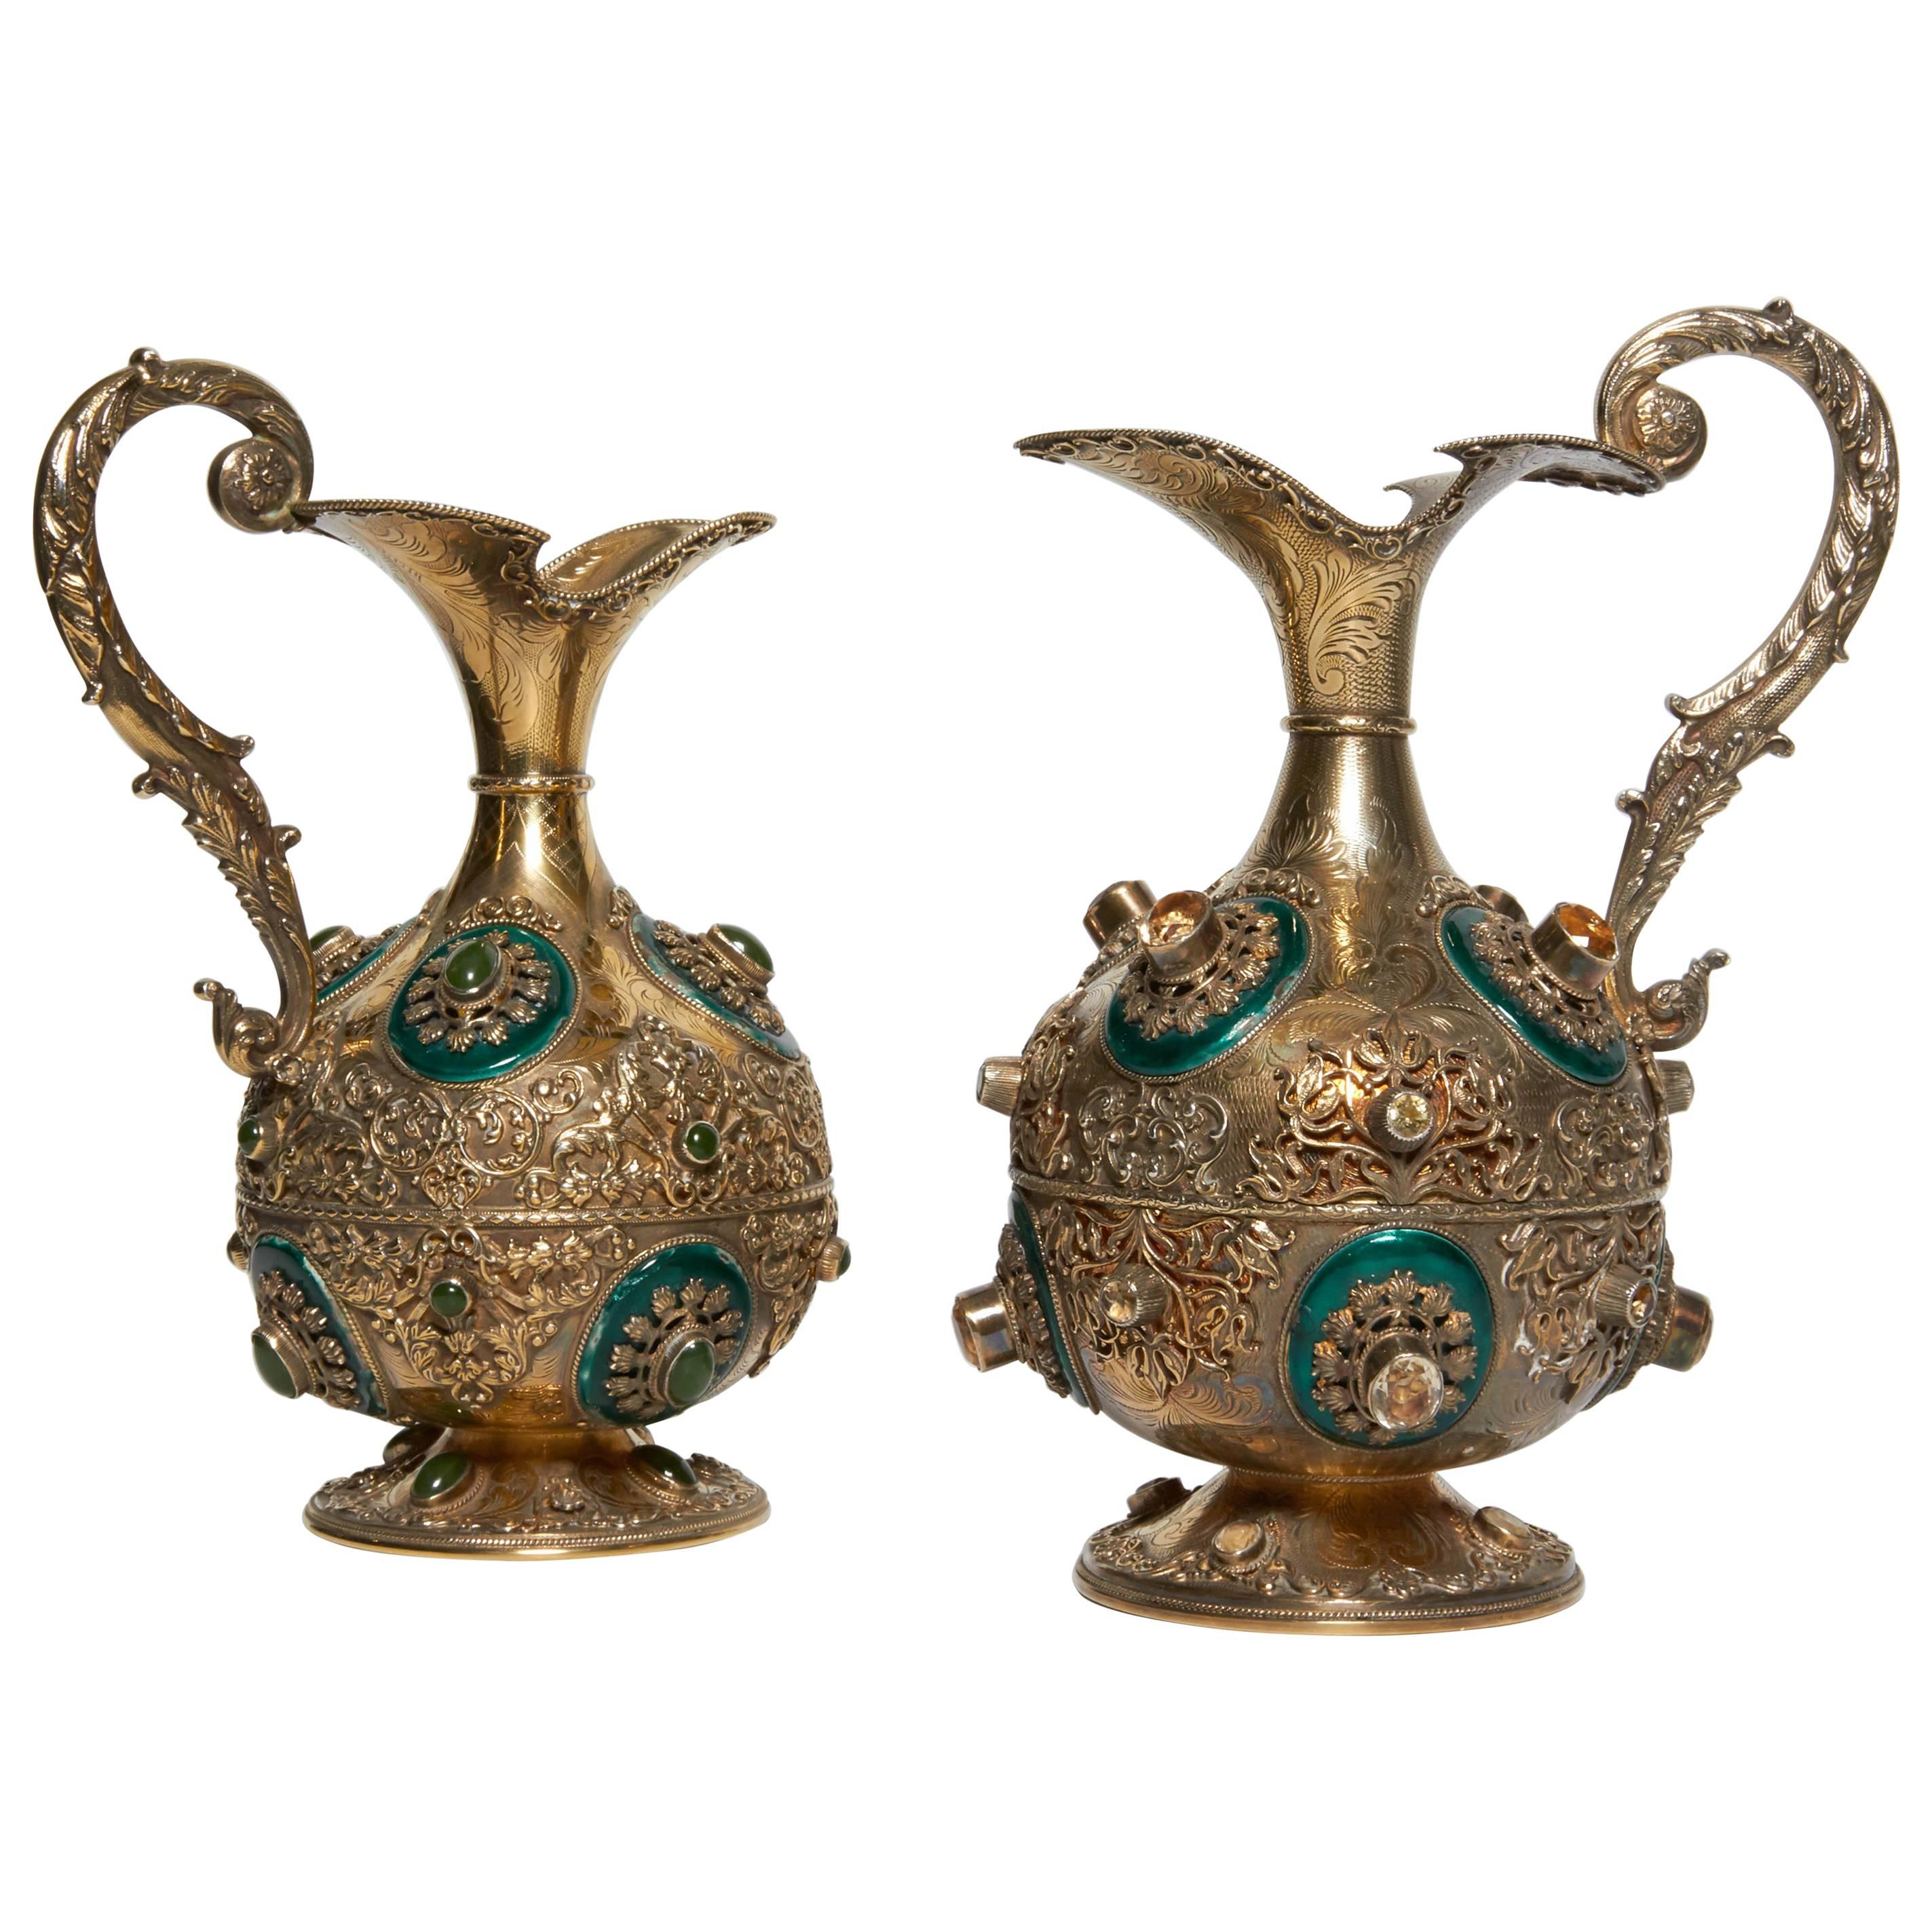 Fine Pair of Antique Austrian Enamel on Silver and Gold Jeweled Ewers